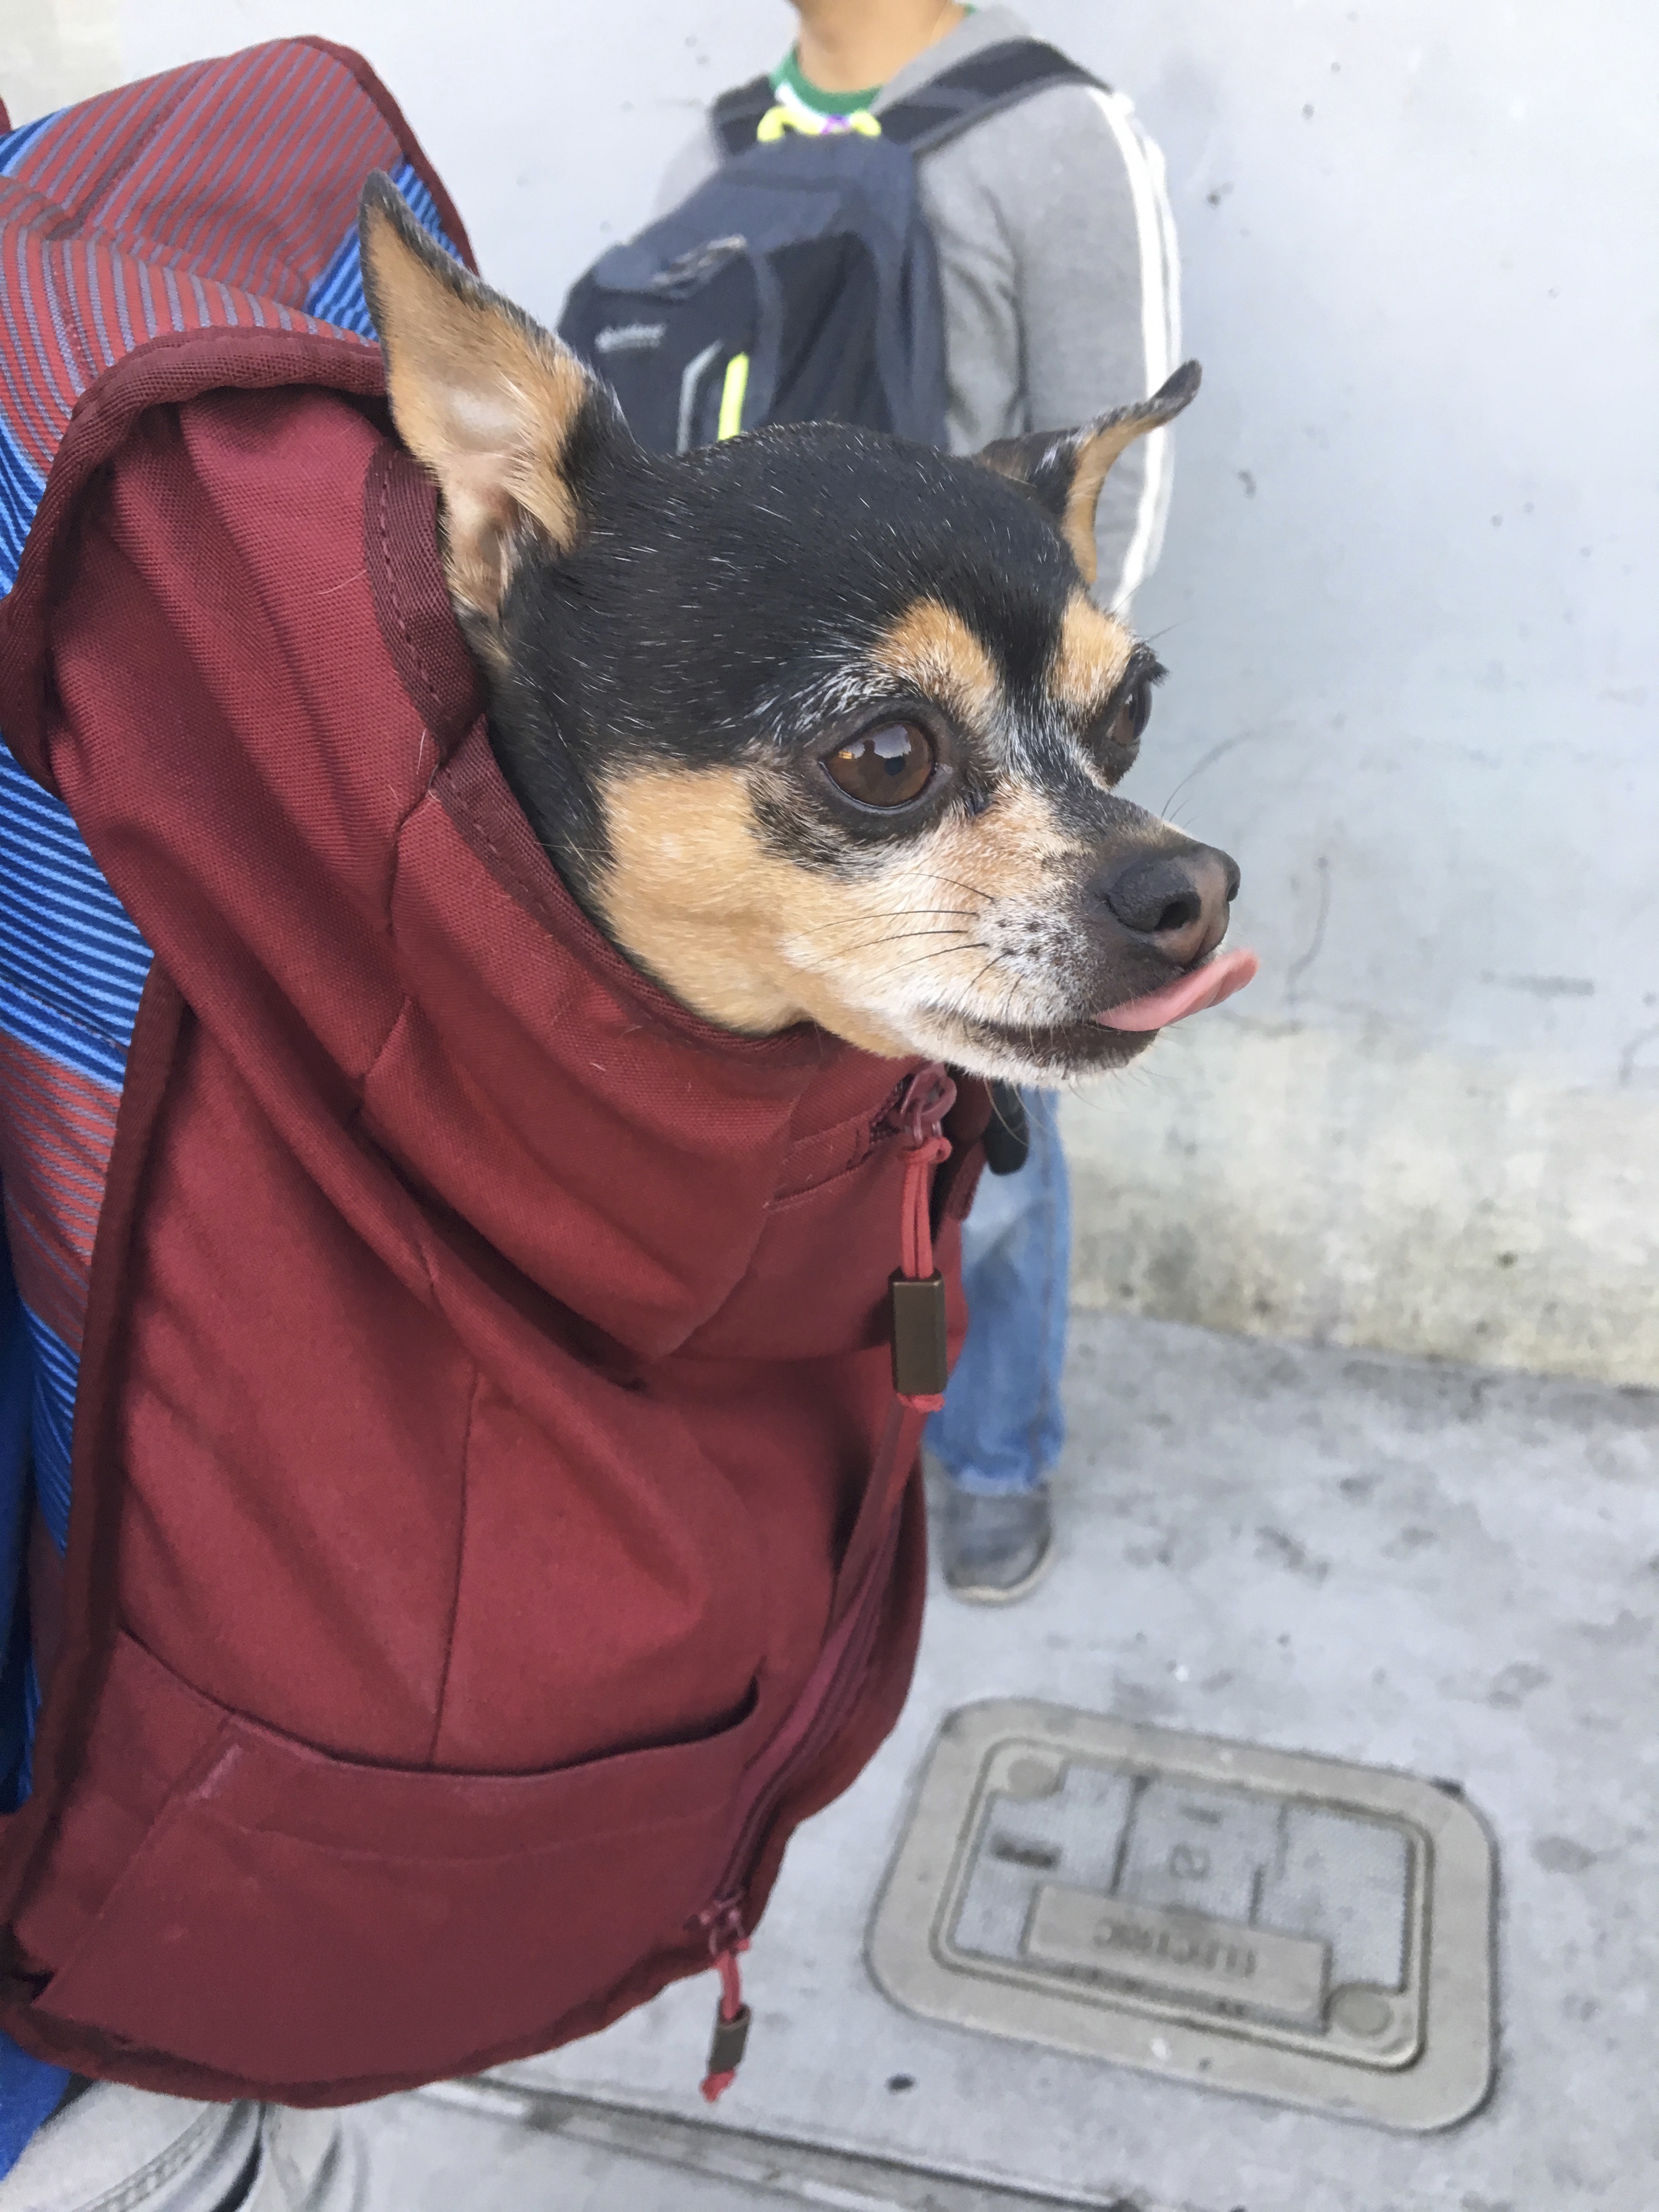 Chihuahua In Backpack Sticking Out Tongue, Blep!